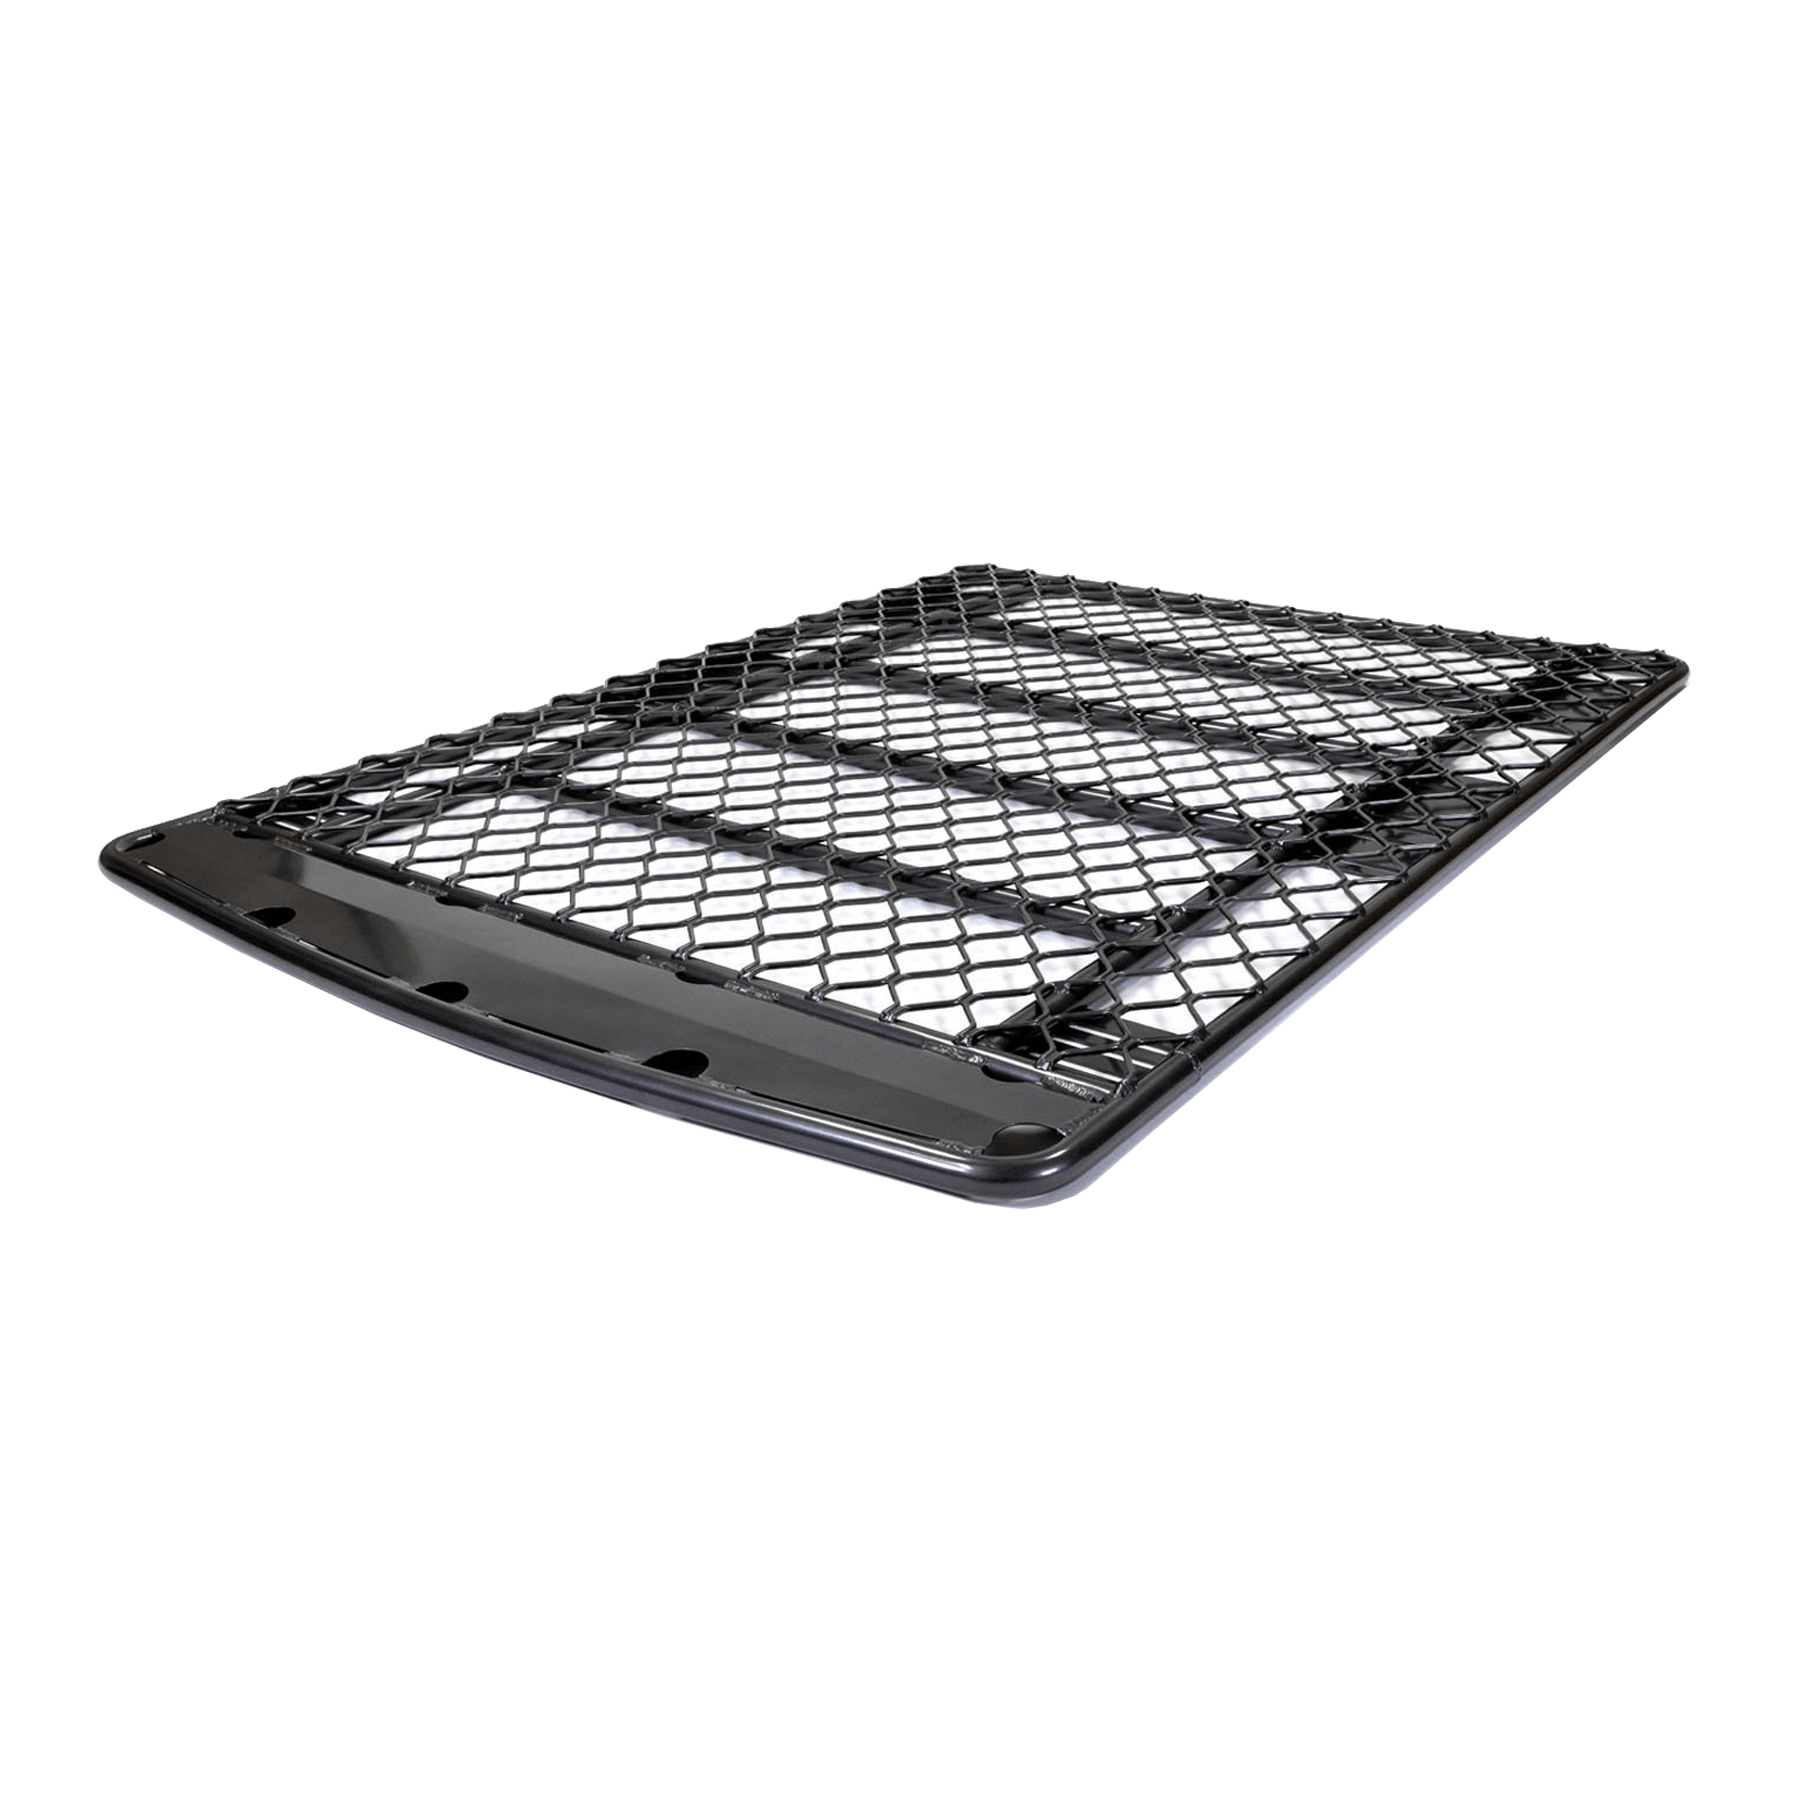 DEFENDER 2007 to 2016  Flat Alloy Roof Rack - 1.8m x 1.25m